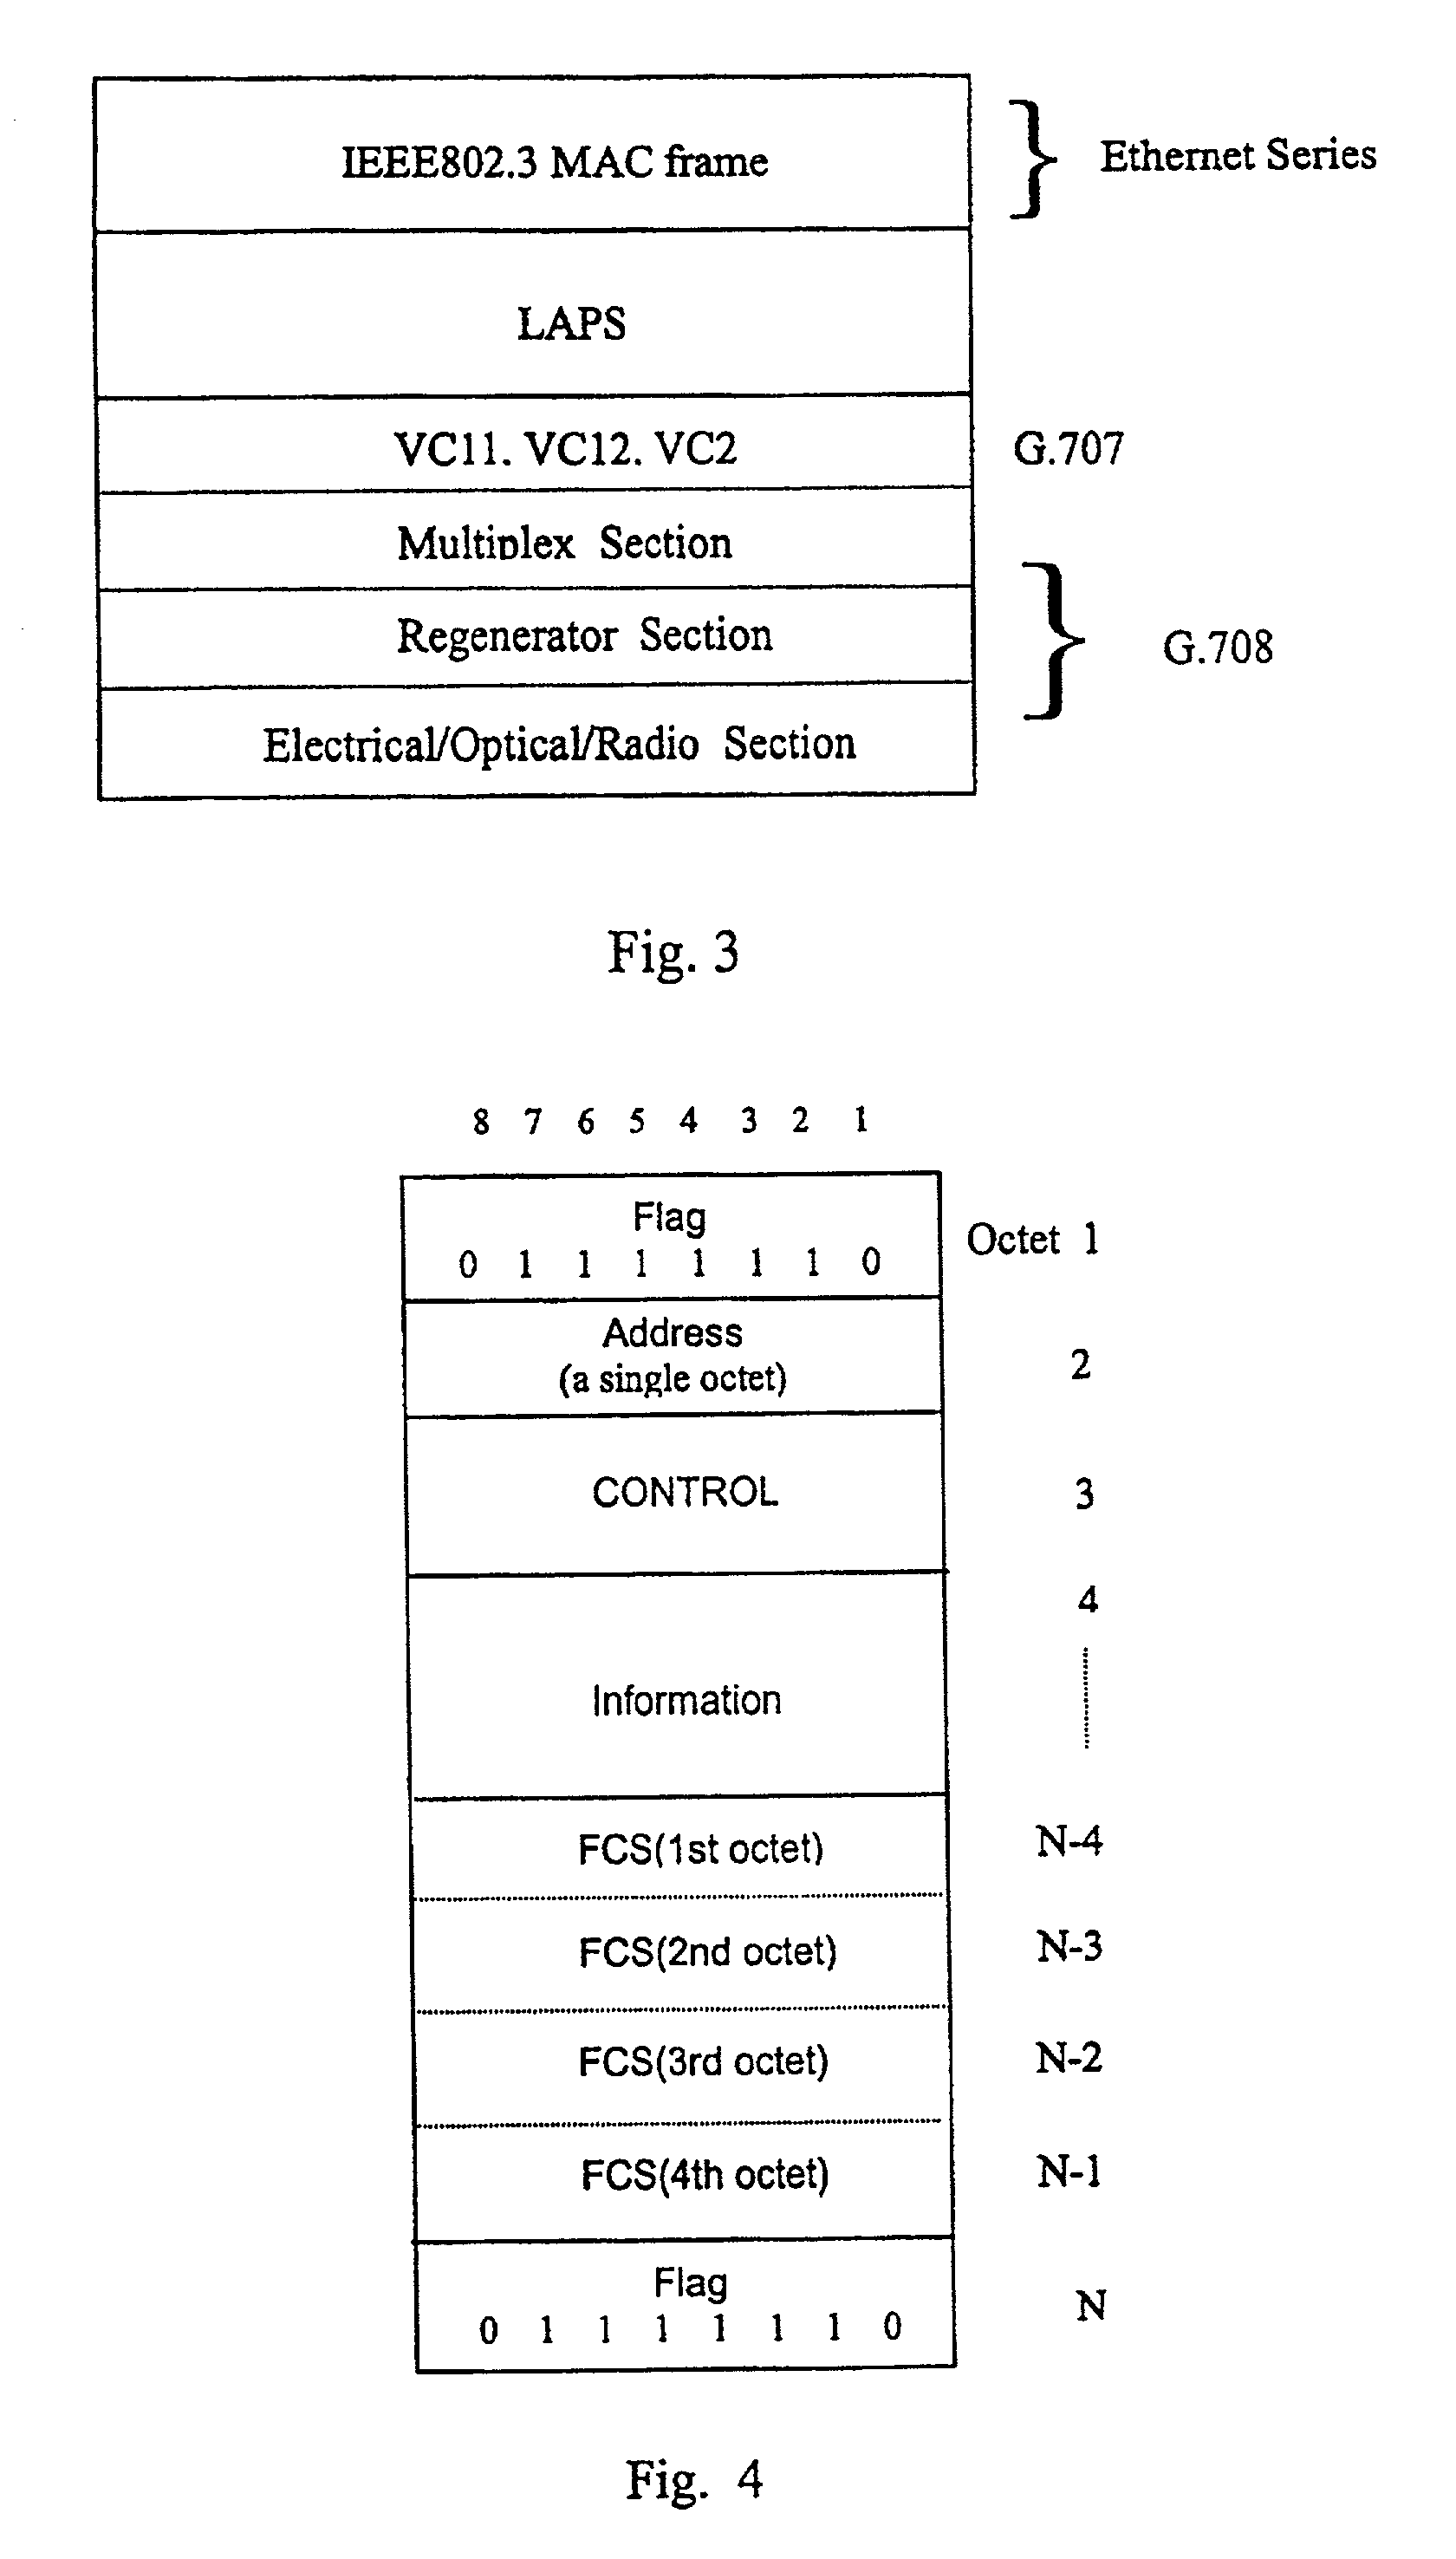 Interfacing apparatus and method for adapting Ethernet directly to physical channel